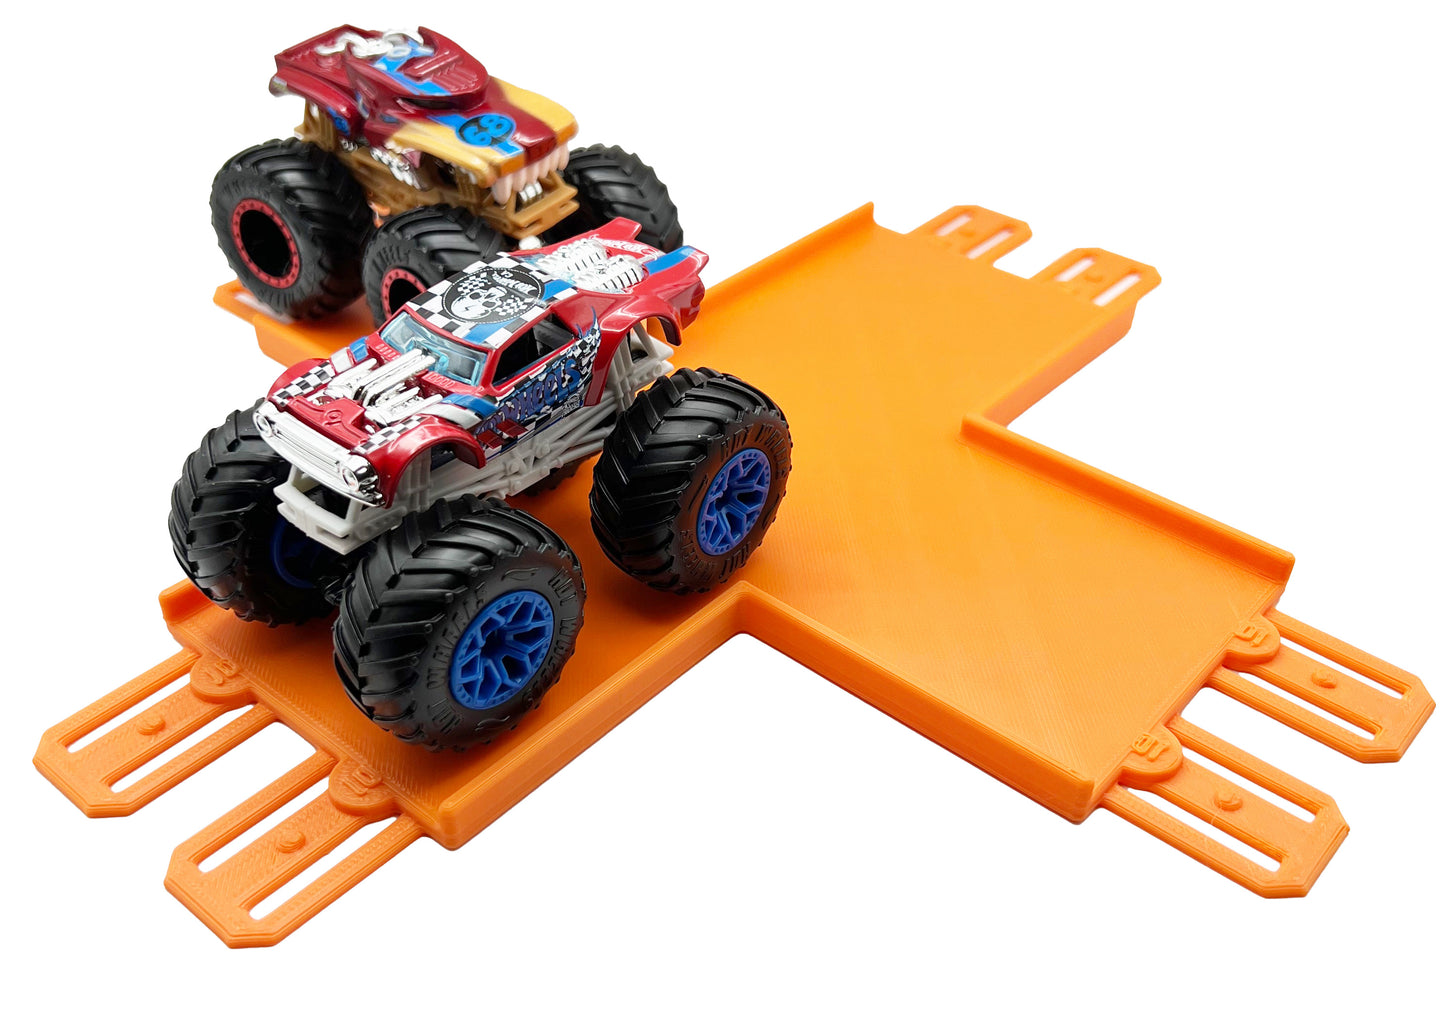 Jeff Did It! - Hot Wheels Monster Truck - 2 Lane 4 Way Crossing Crisscross Crash - 3D Printed - Designed and Made in the USA